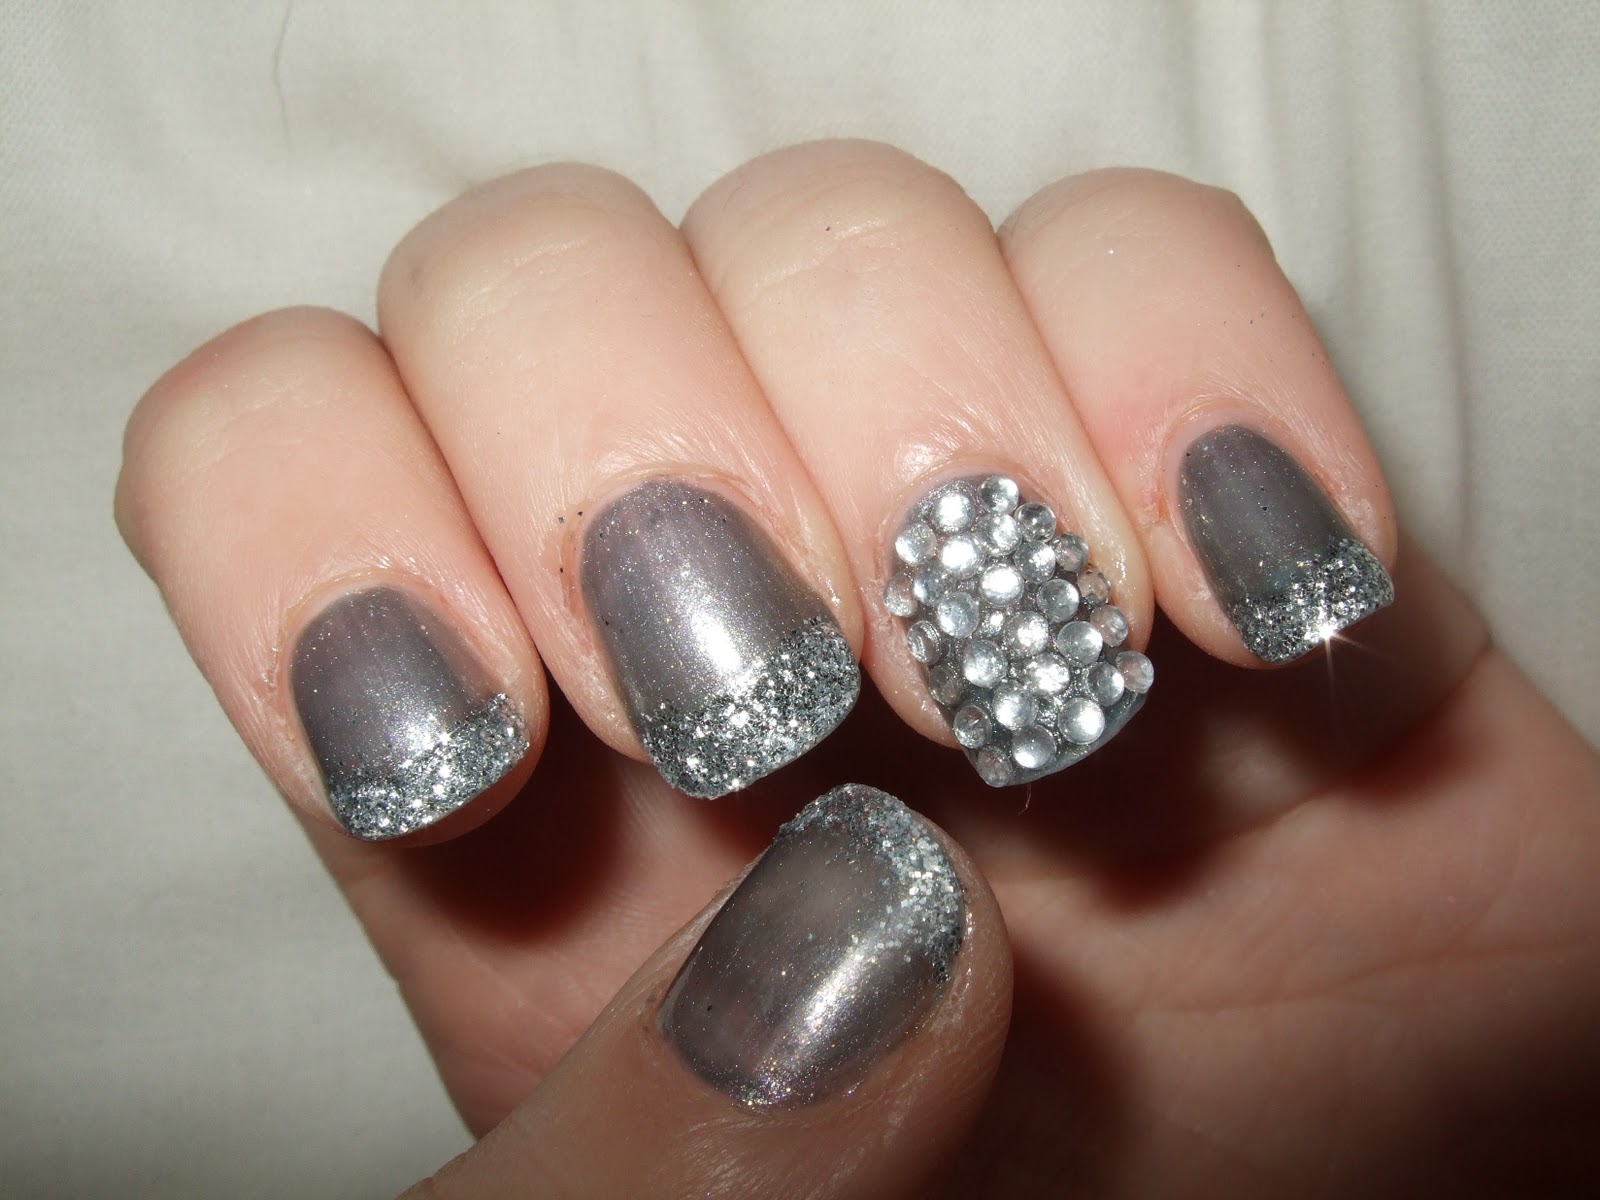 3. Sparkly New Year's Eve Nails - wide 6